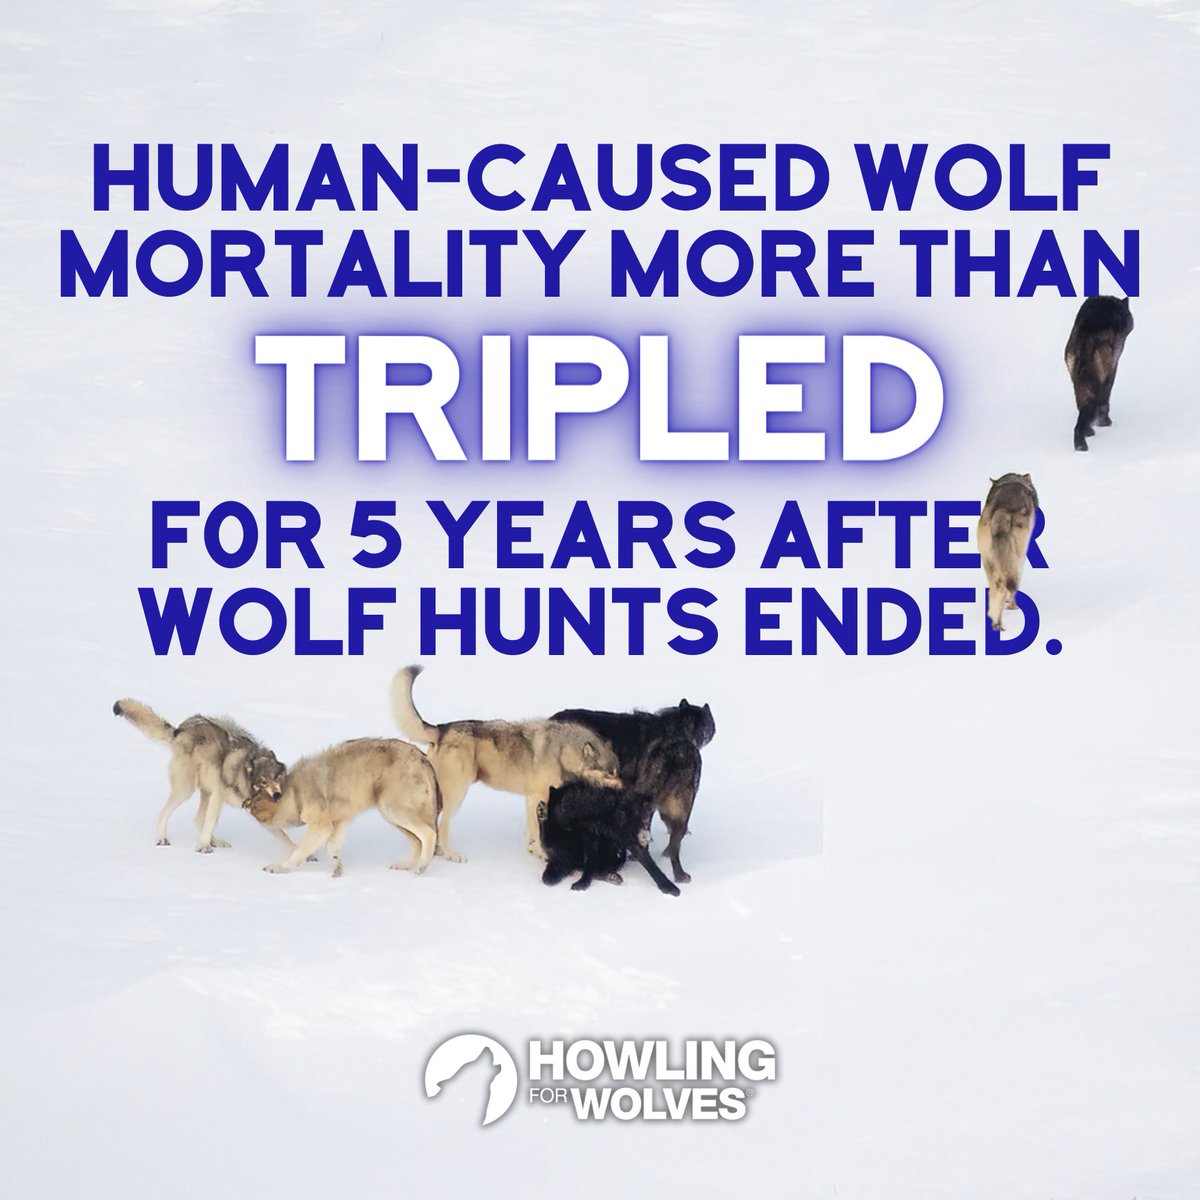 A study in @‌nature exposed that between 2004 & 2019, average annual wolf mortality increased from 21.7% before hunting seasons to 43.4% during AND AFTER hunting seasons including a more than TRIPLING of human caused wolf mortality.